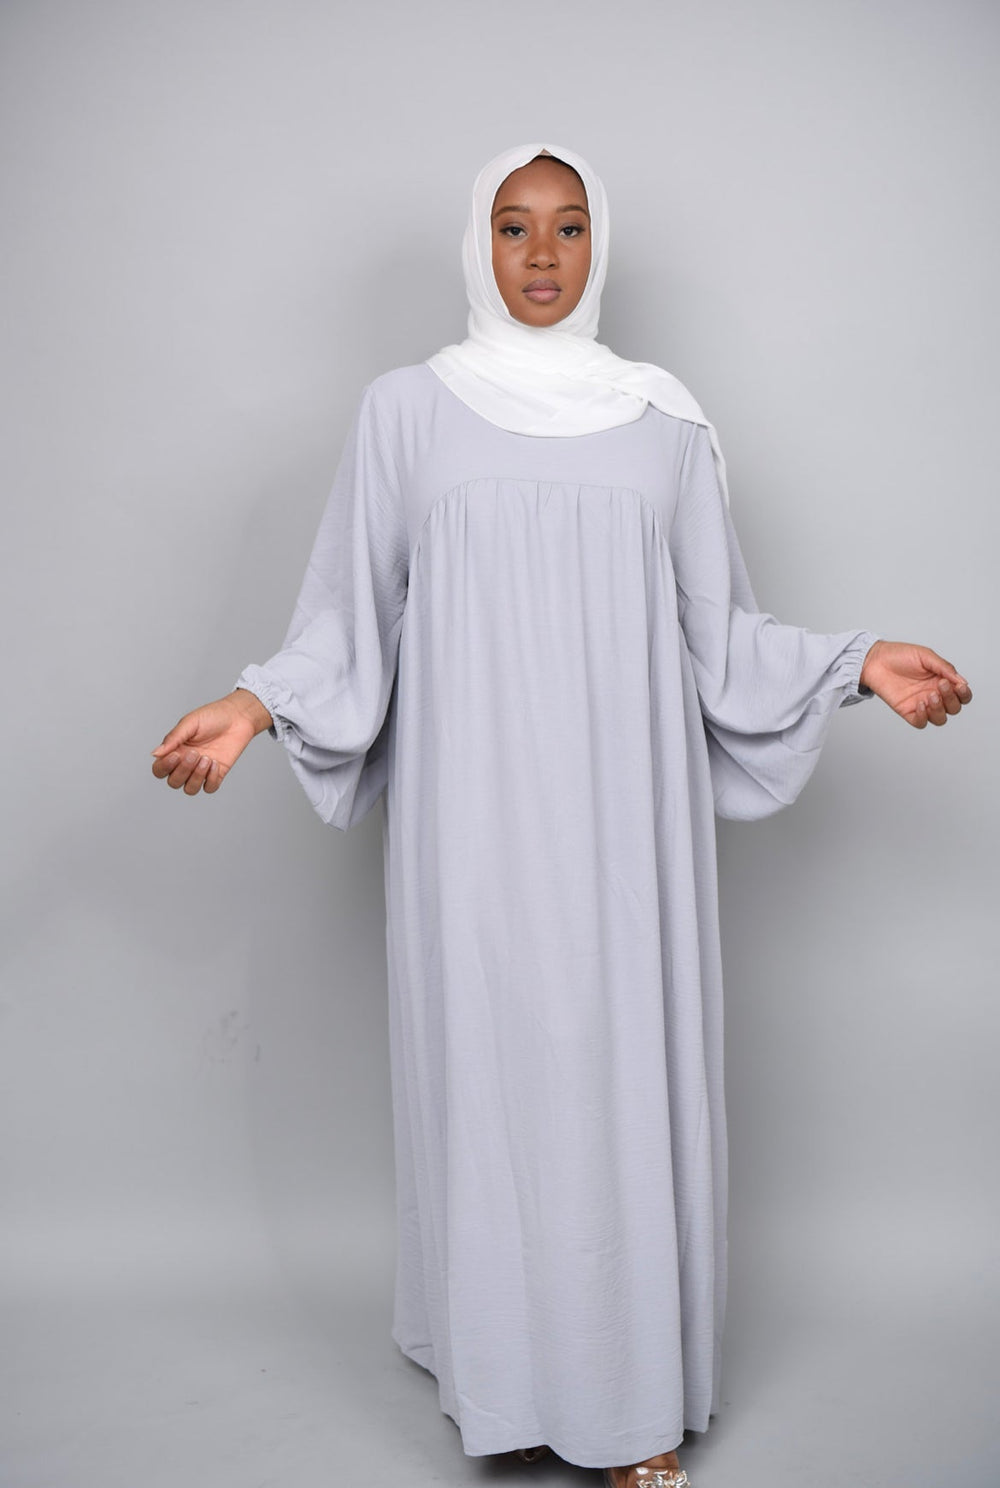 Get trendy with Amelia Textured Abaya - Light gray -  available at Voilee NY. Grab yours for $54.90 today!